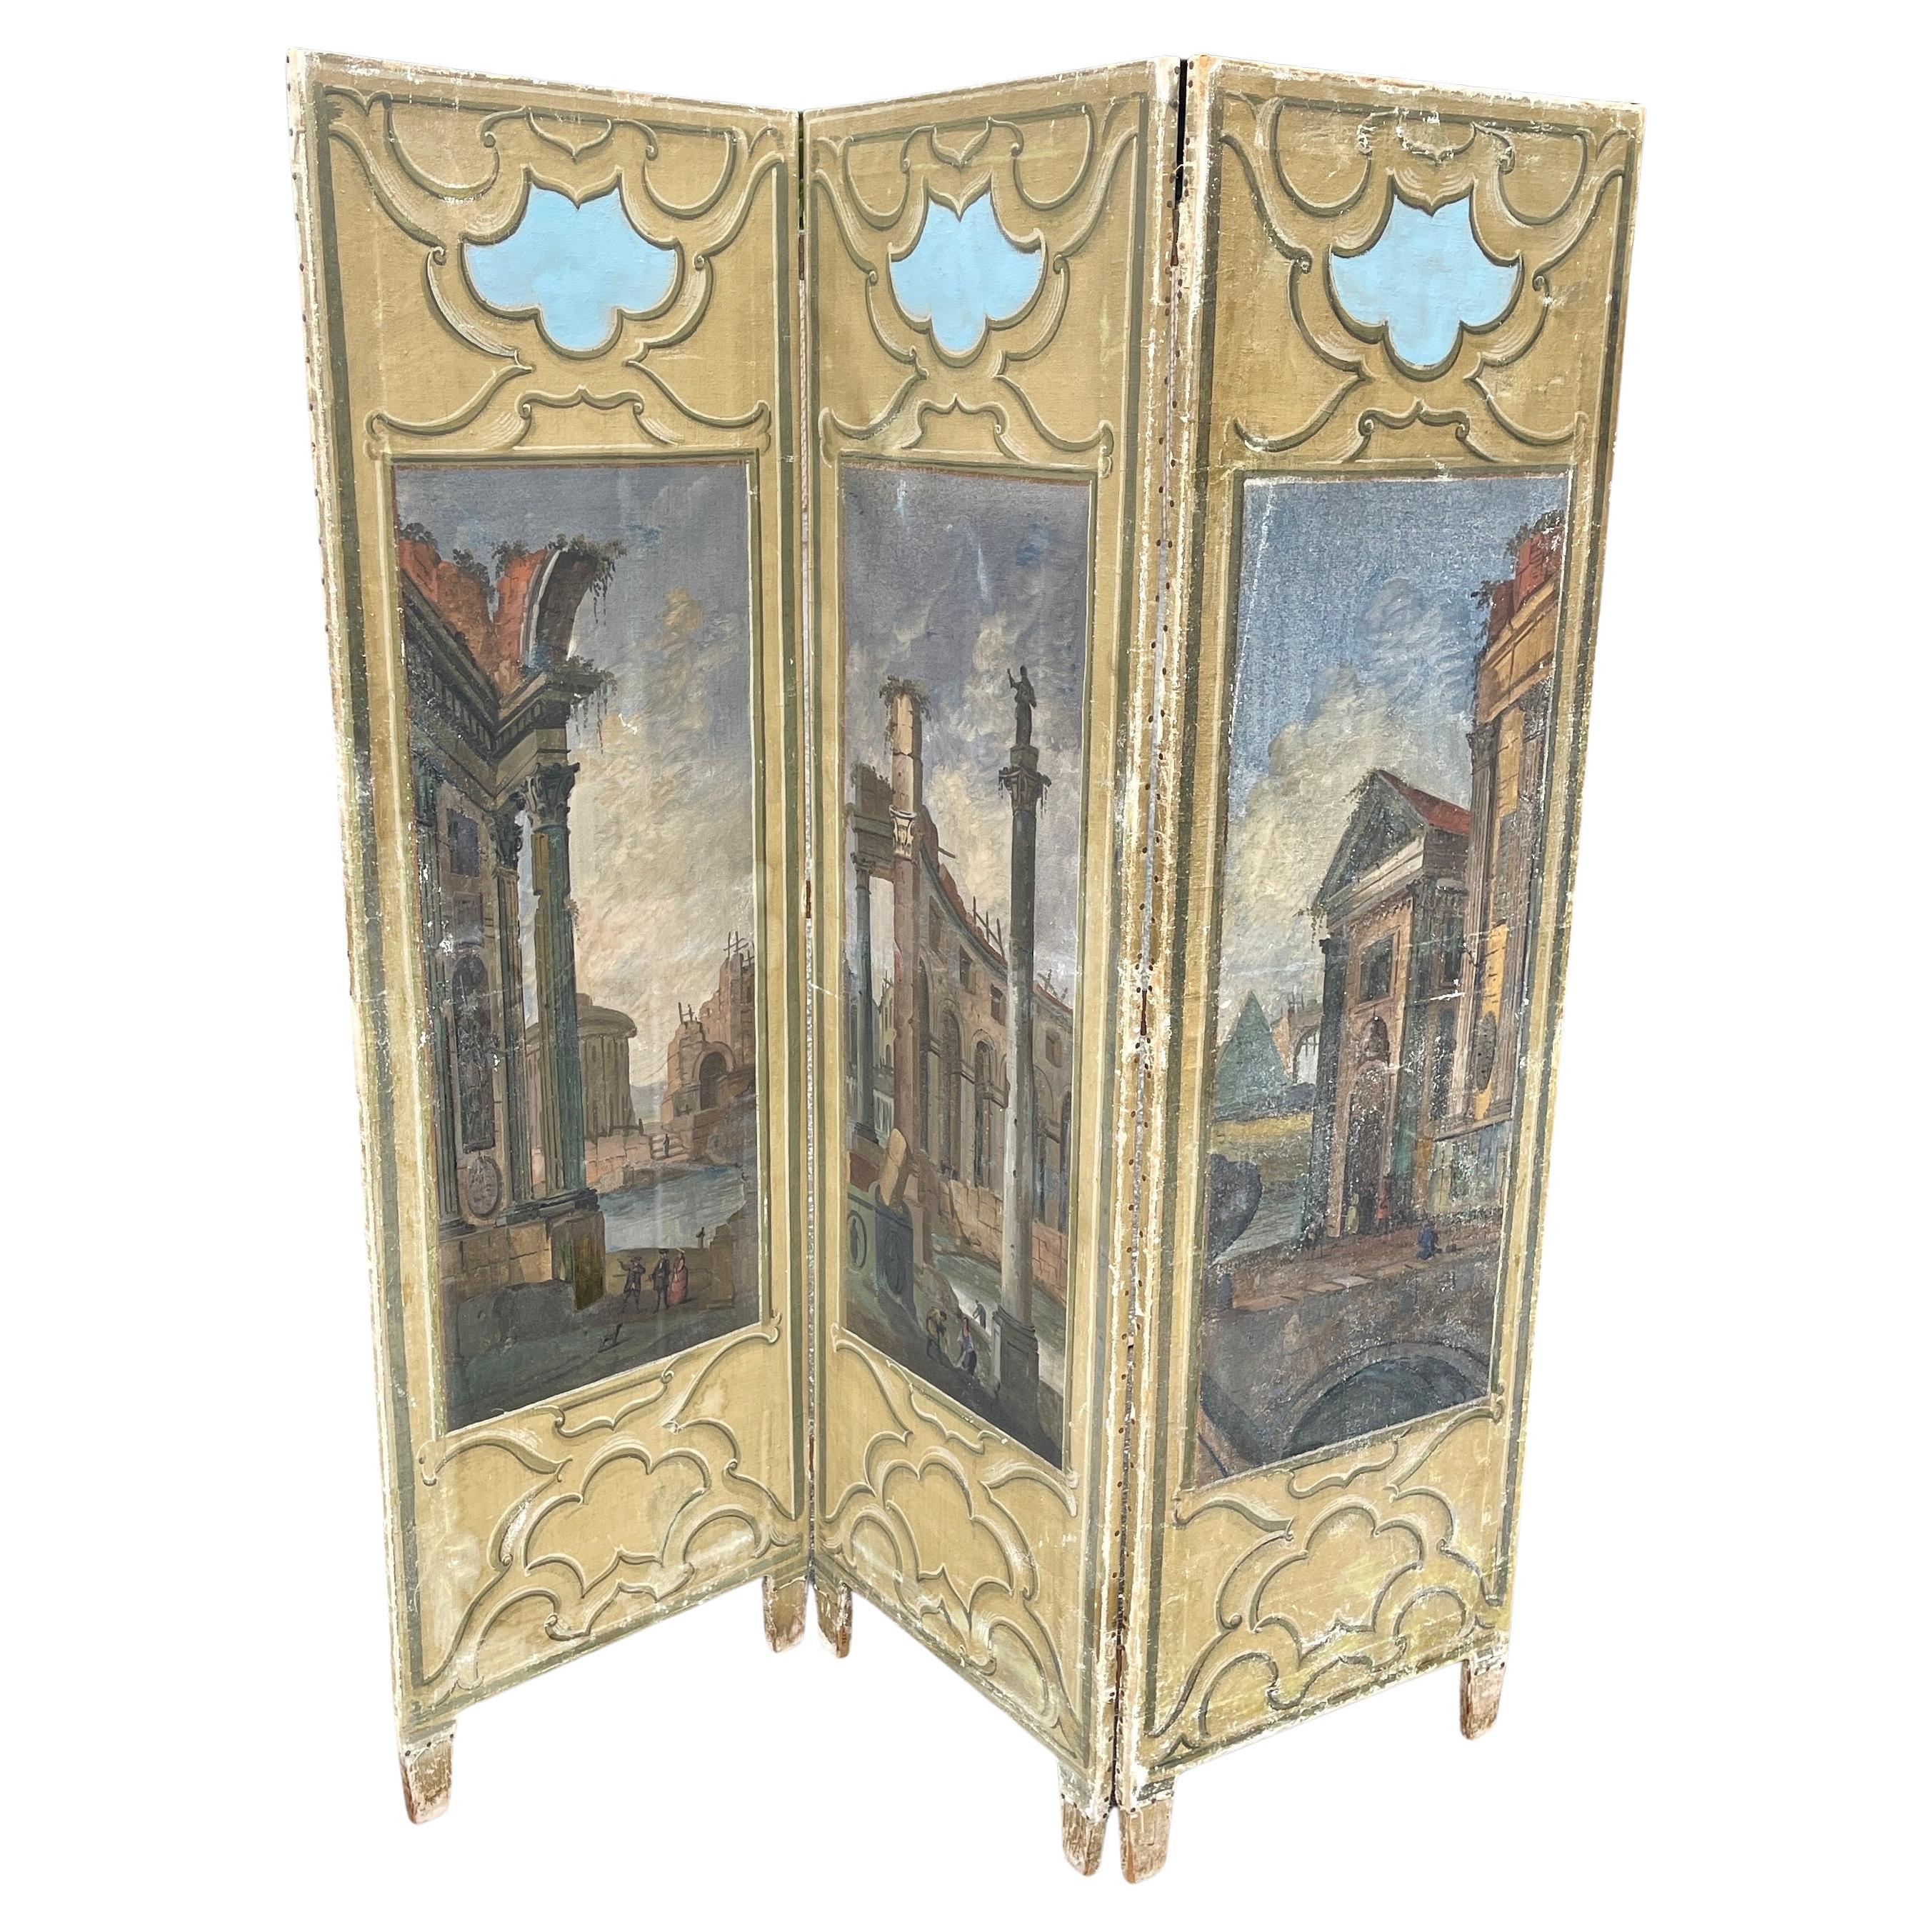 Three panel hand painted room dressing screen divider, Italy.

A 1800s Italian Neoclassical 3 panel floor screen, room divider. Hand painted on canvas panels depicting early Roman, Pompeii ruins. Wonderful colors of French blues and Tuscan colors.